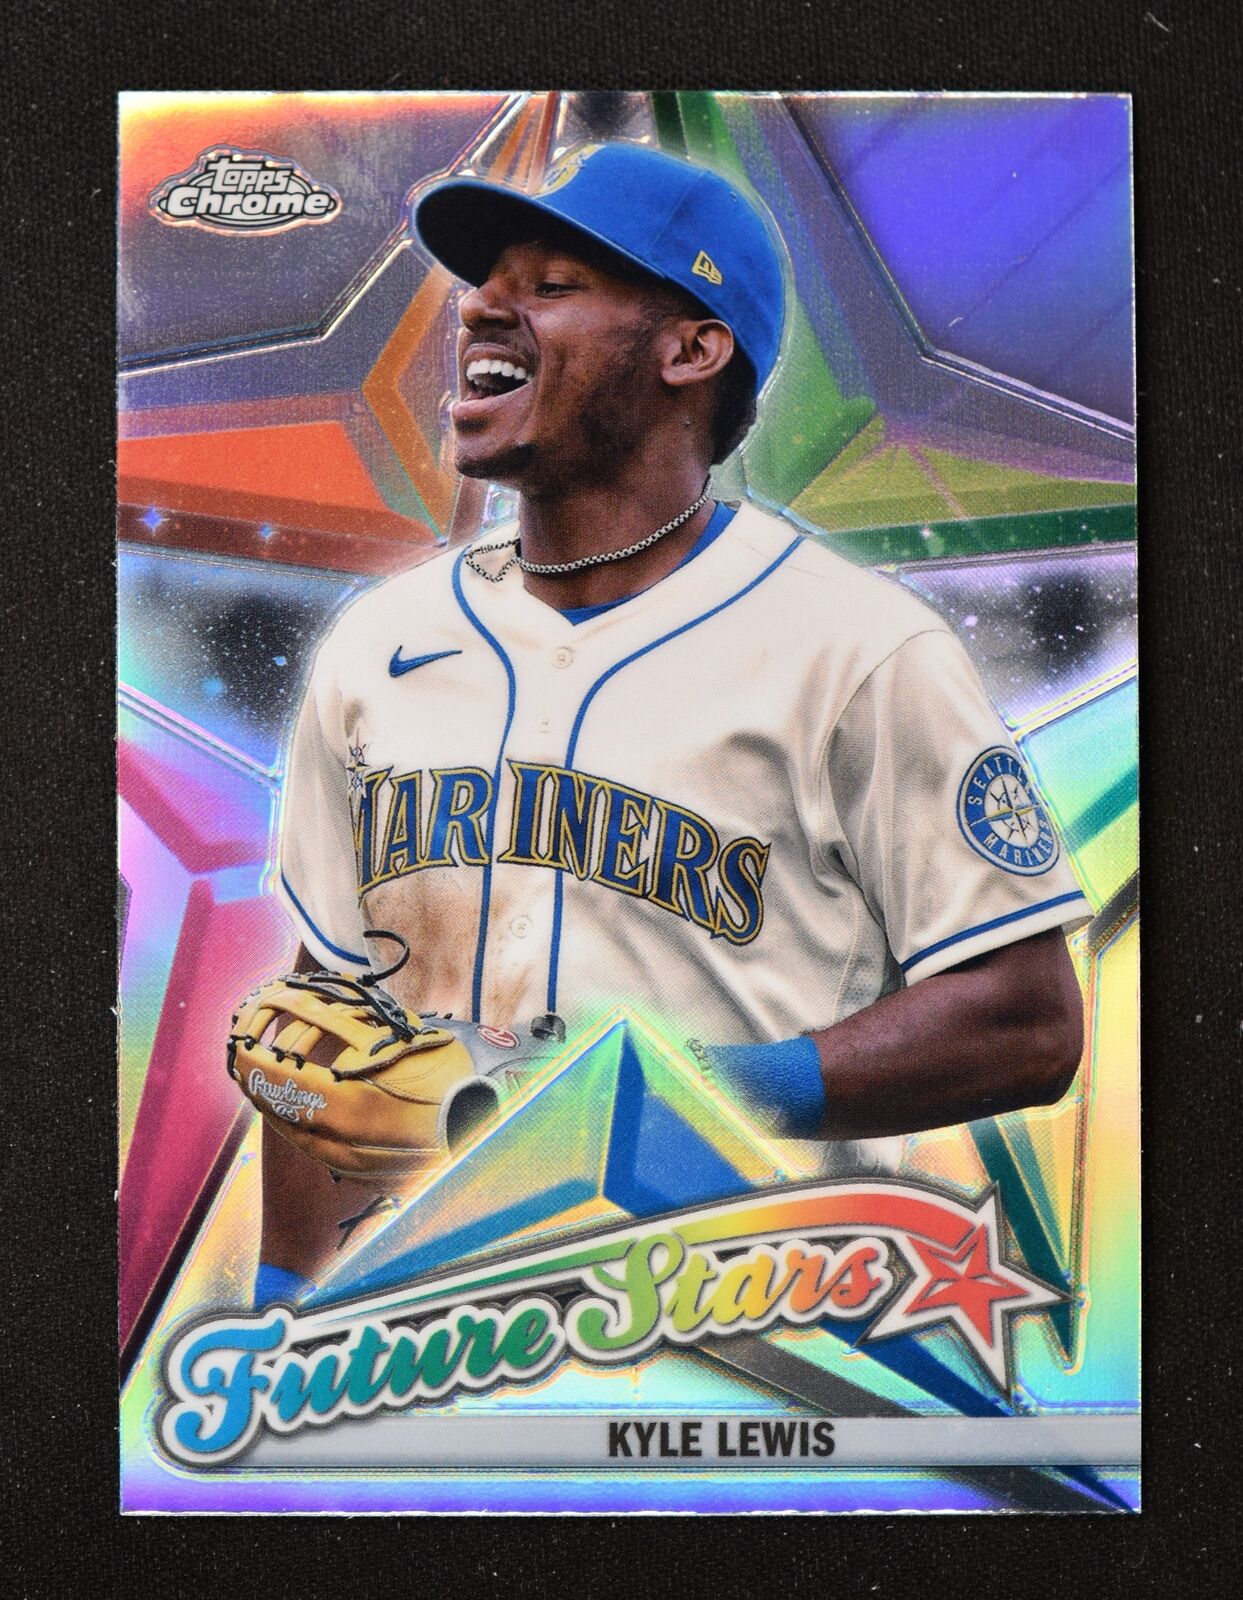 2022 Topps Chrome Future Stars #FS-14 Kyle Lewis Seattle Mariners